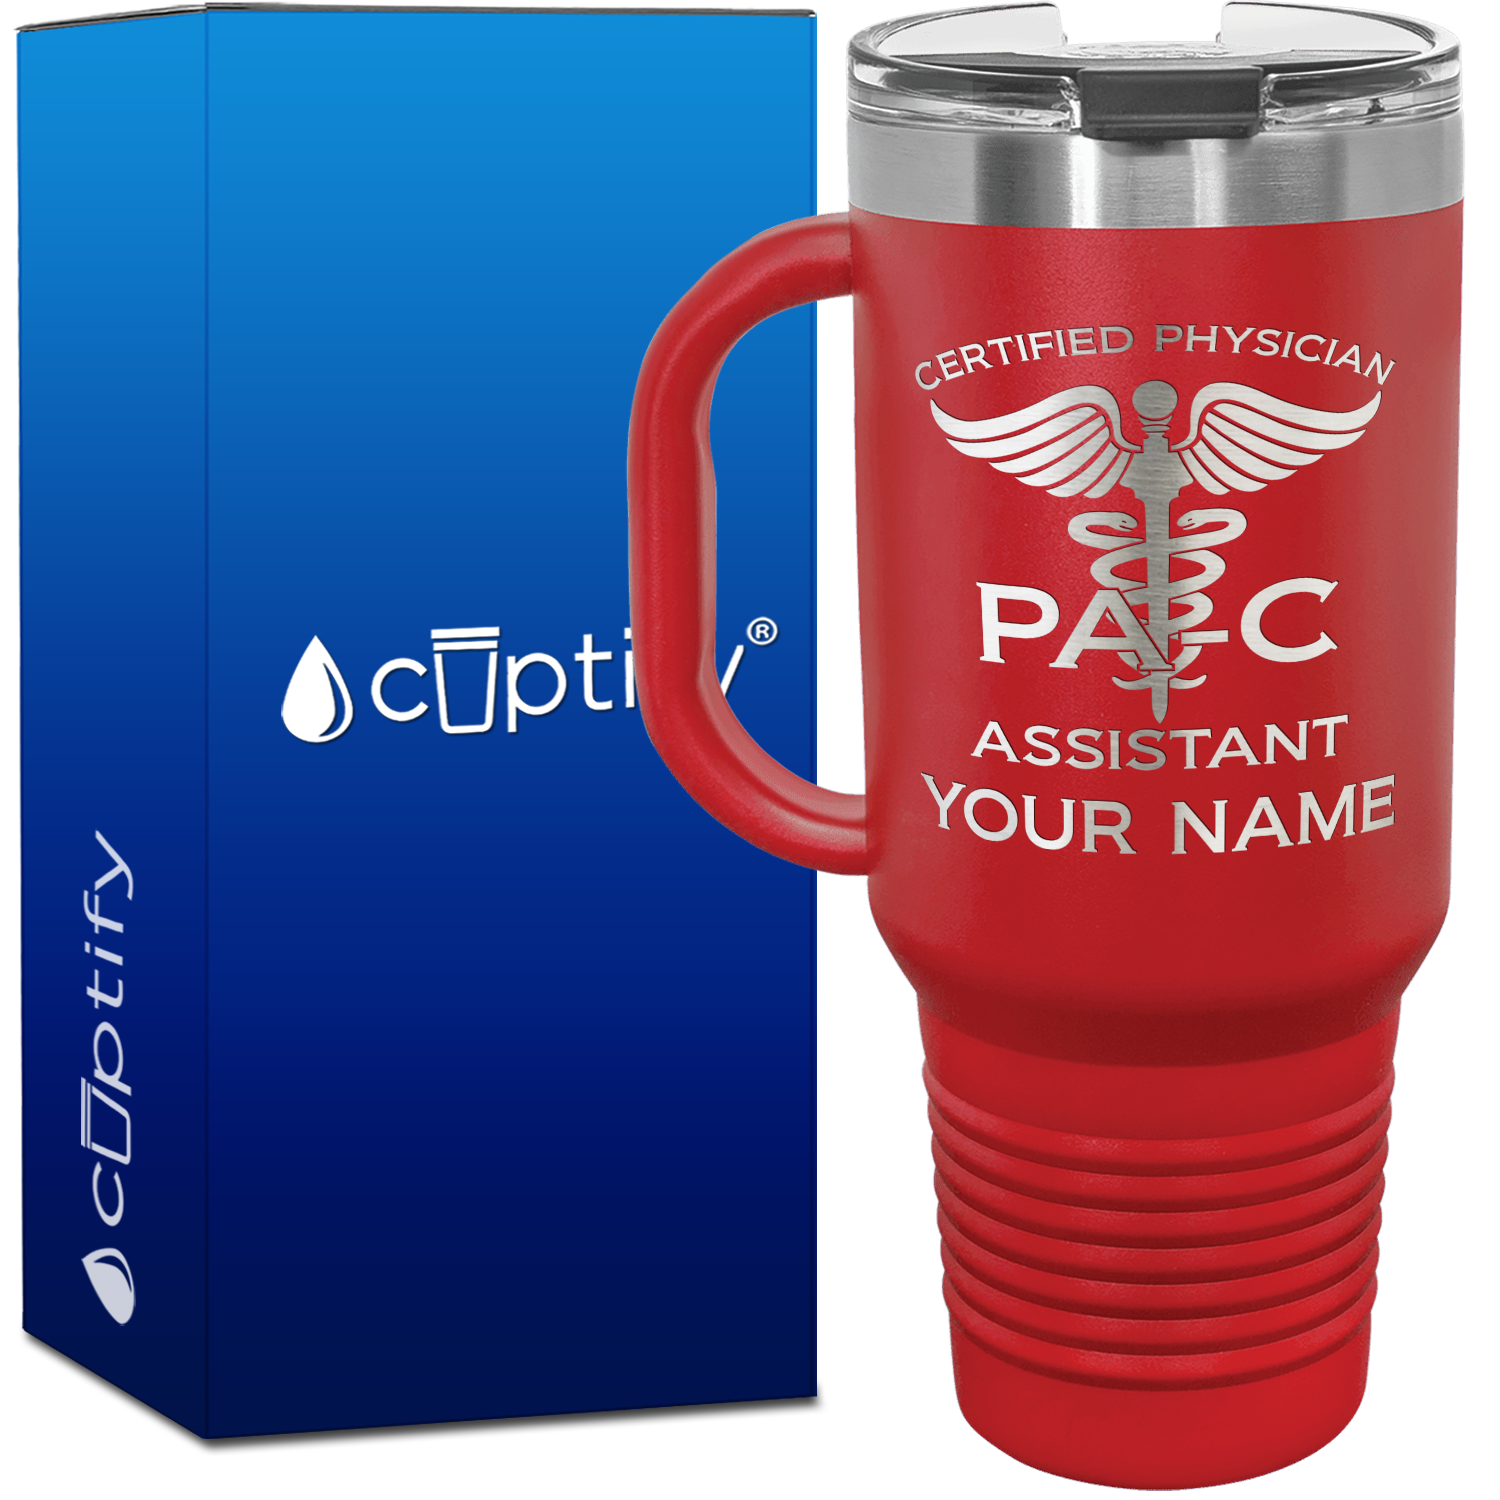 Personalized PA-C Certified Physician Assistant 40oz Medical Travel Mug